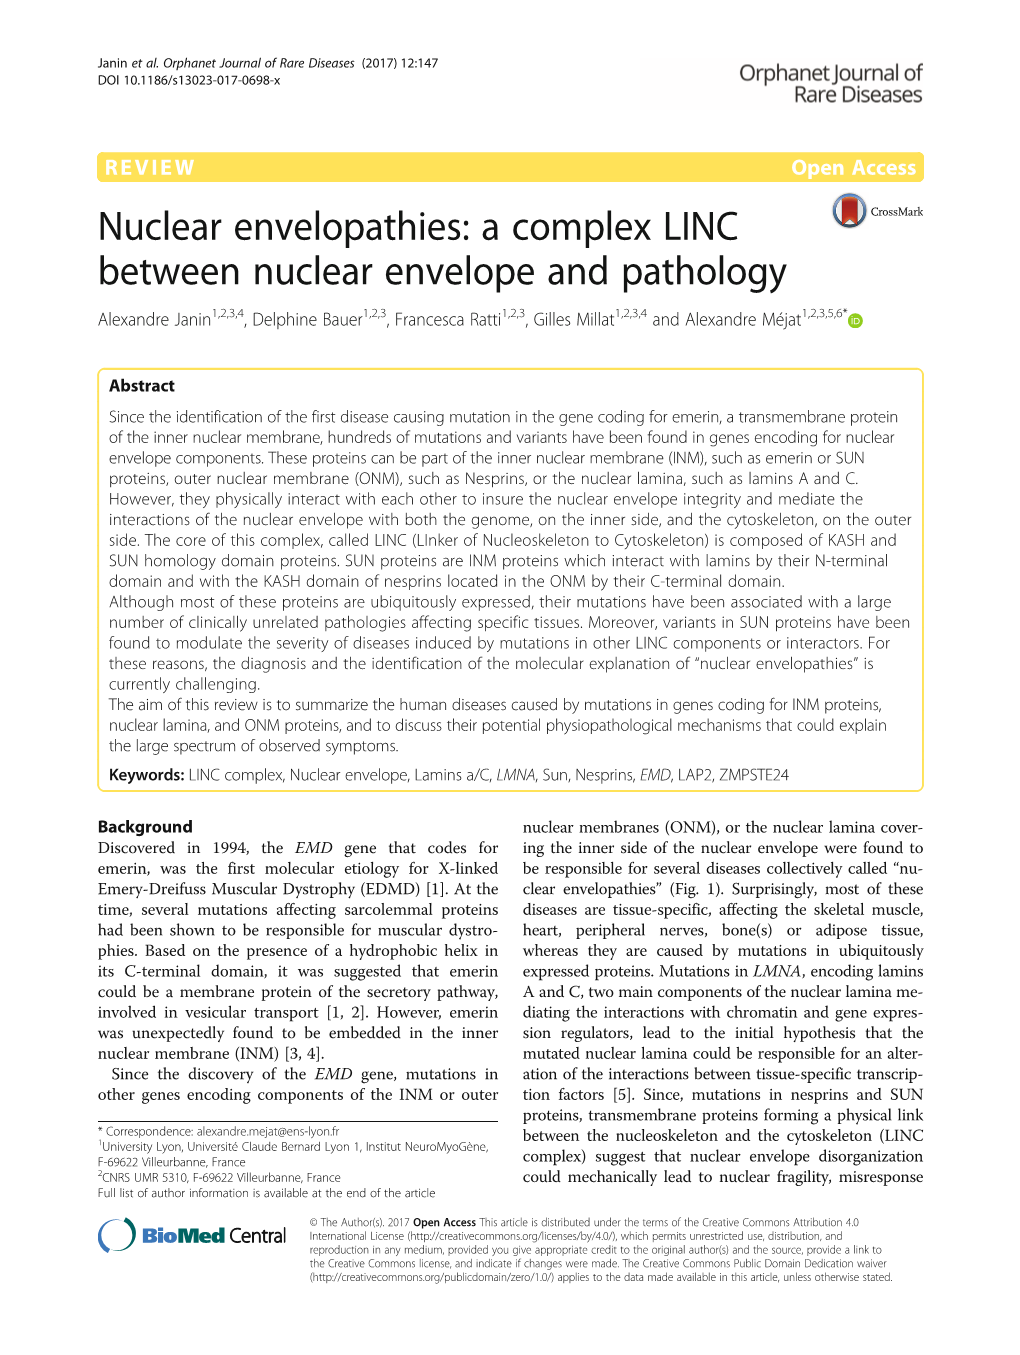 A Complex LINC Between Nuclear Envelope and Pathology